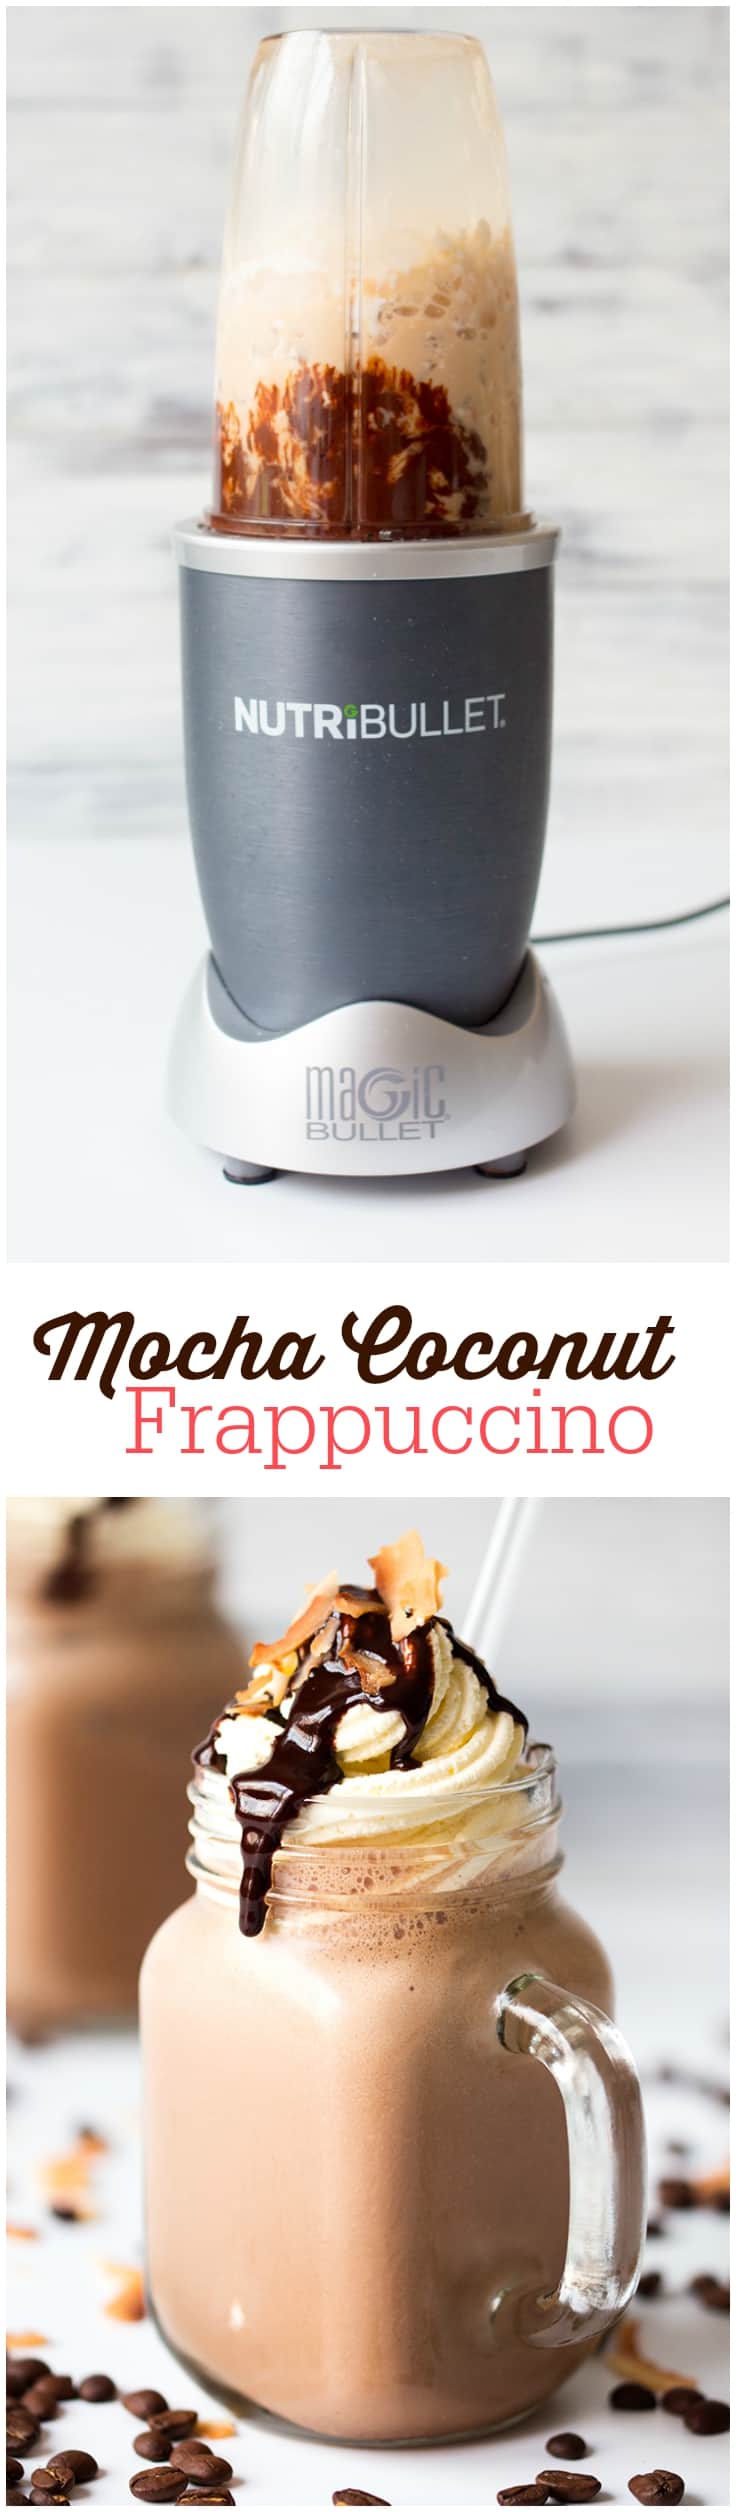 Mocha Coconut Frappuccino - A cafe-worthy, at-home iced coffee treat. The flavours of mocha and coconut pair perfectly in this cool and creamy frappuccino.